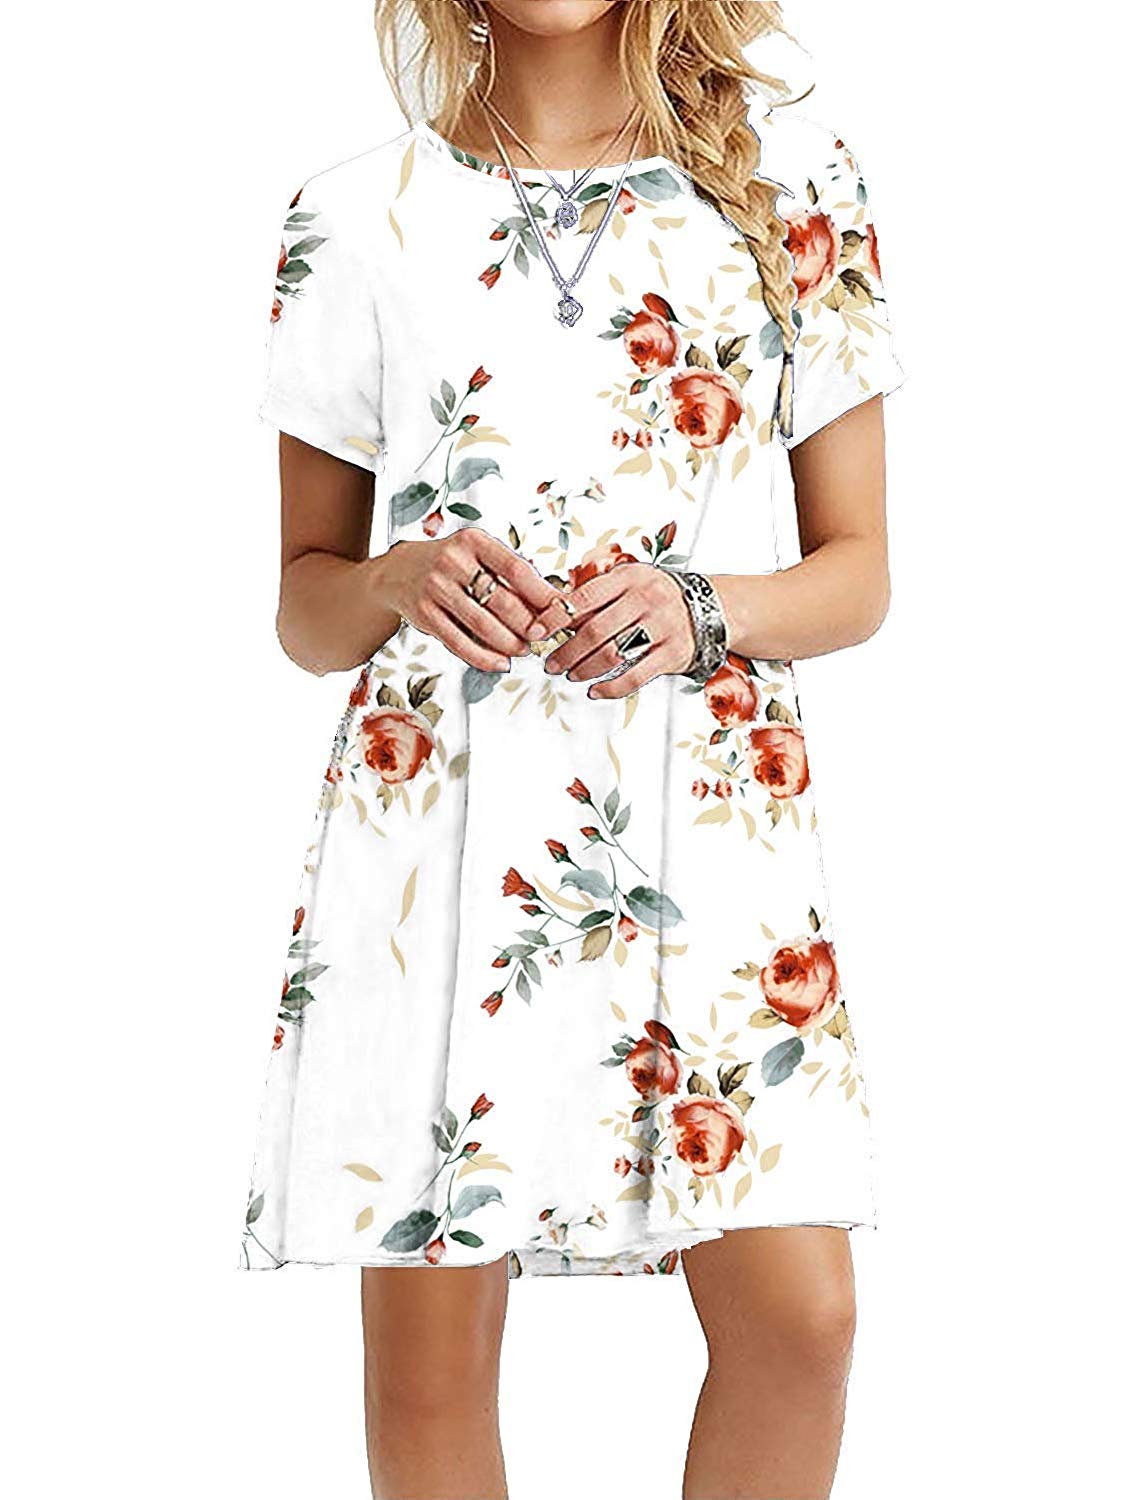 Floral Print Dress For Women – Loose Fit Soft Stretchy Summer Wear ...